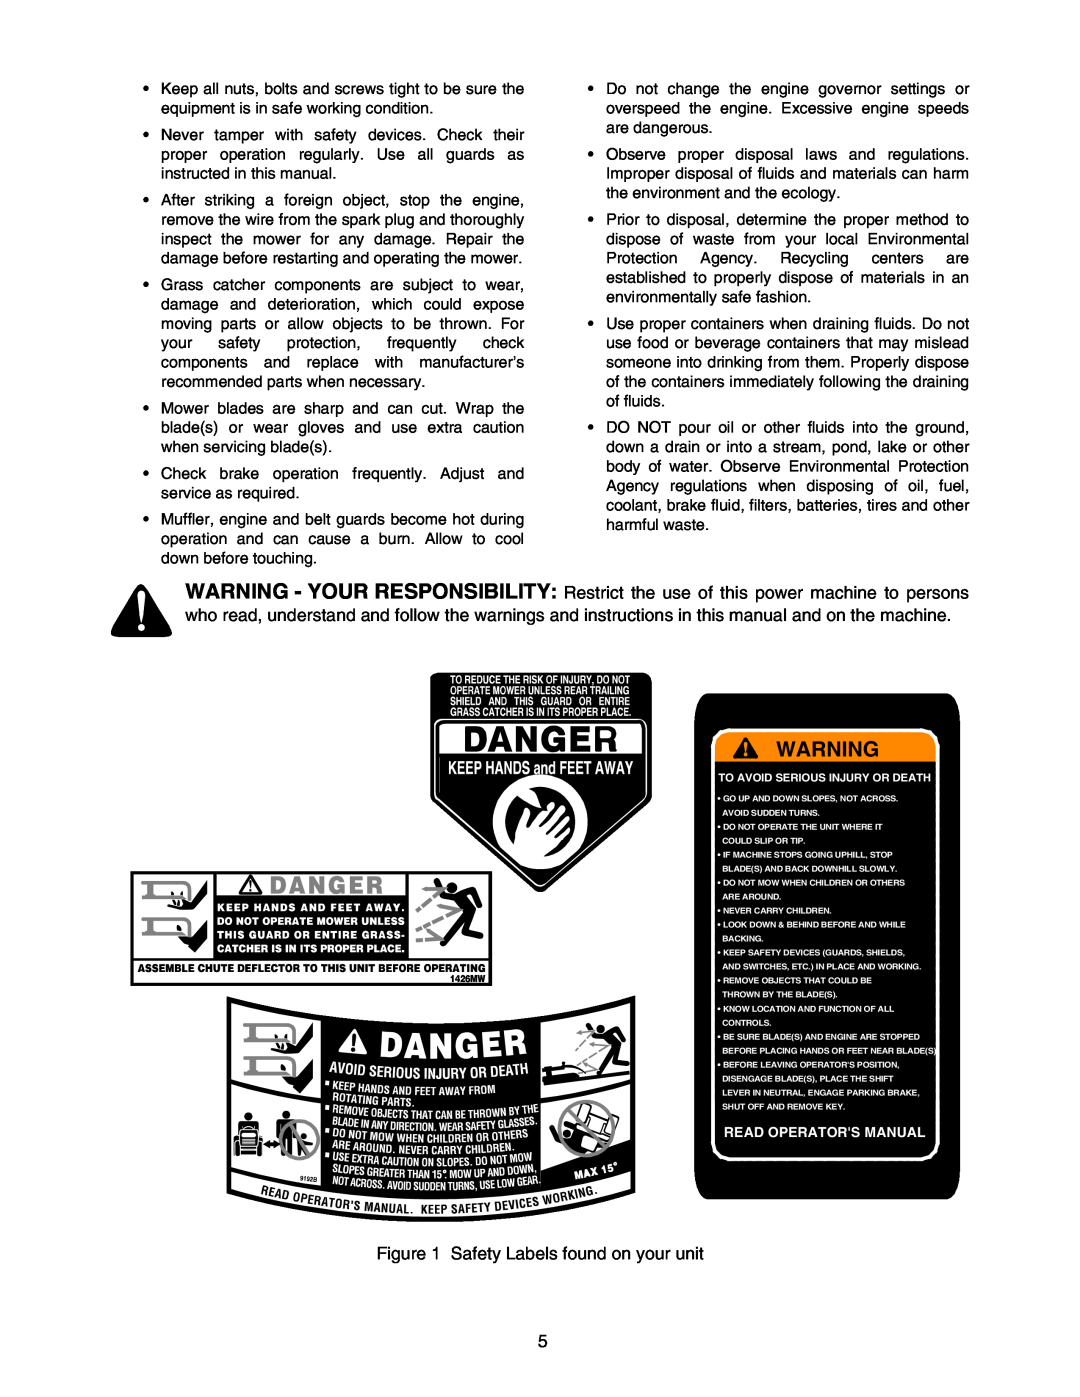 Yard-Man 604 manual Safety Labels found on your unit, Read Operators Manual 